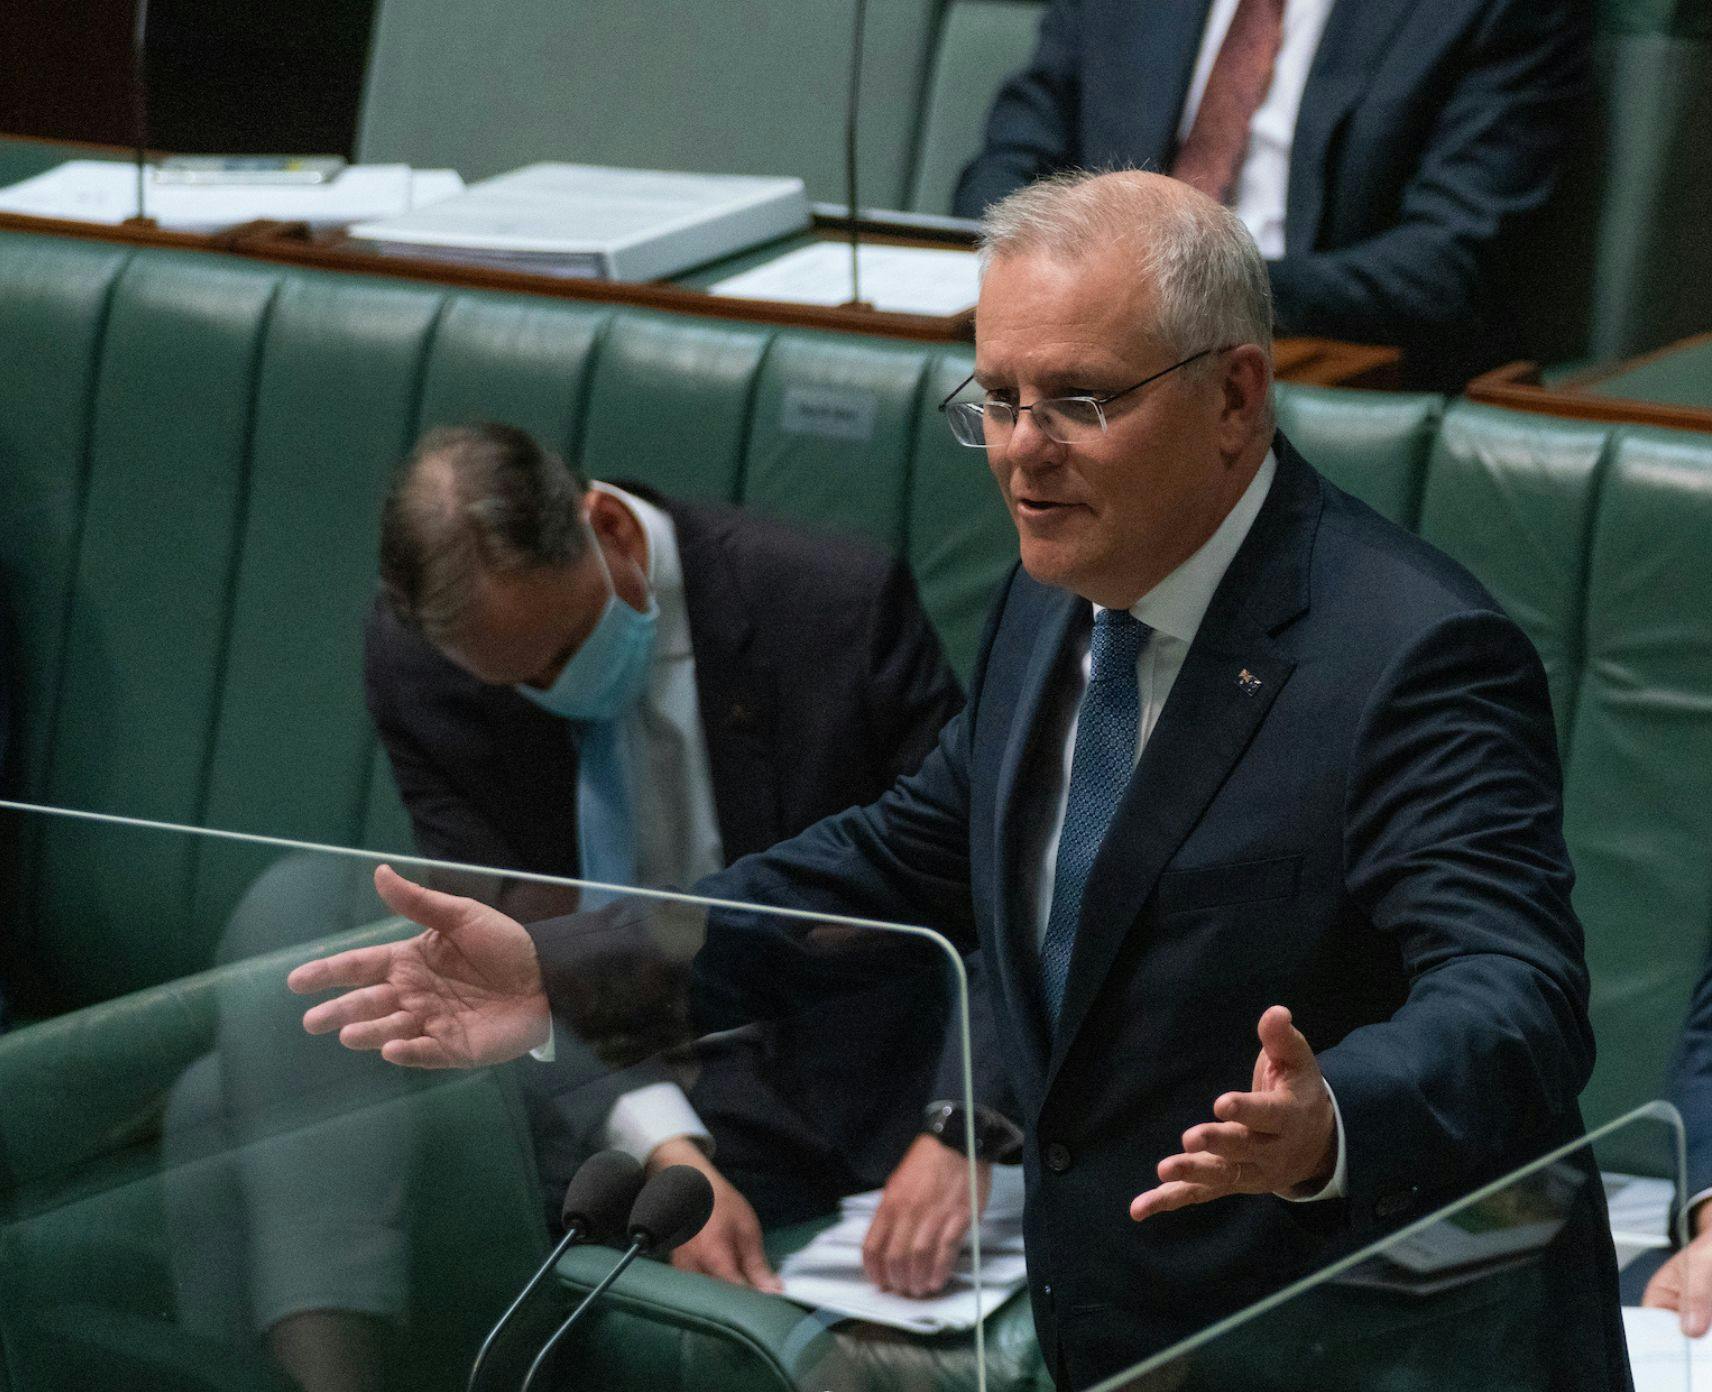 Prime Minister Scott Morrison speaking during Question Time in the House of Representatives